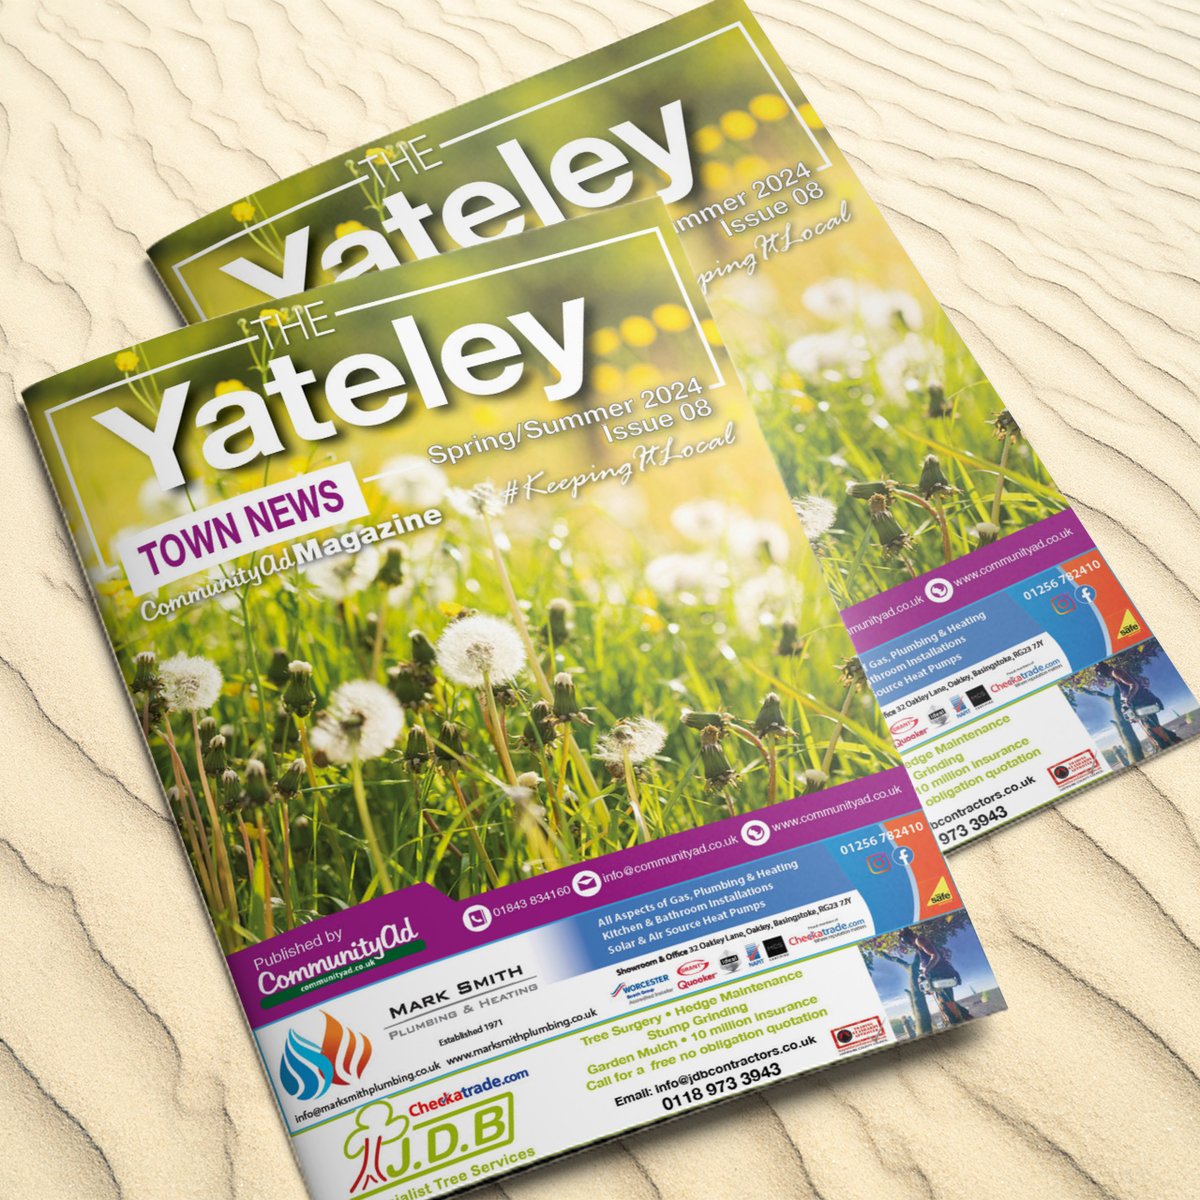 🎉 📰 Introducing the brand new Yateley Town News Magazine!🏡📷 From community events to business highlights, we're keeping it local and keeping you informed. Stay connected with your town and pick up your copy today! communityad.co.uk/back-issues/ya… #Yateley #hampshire #local #community